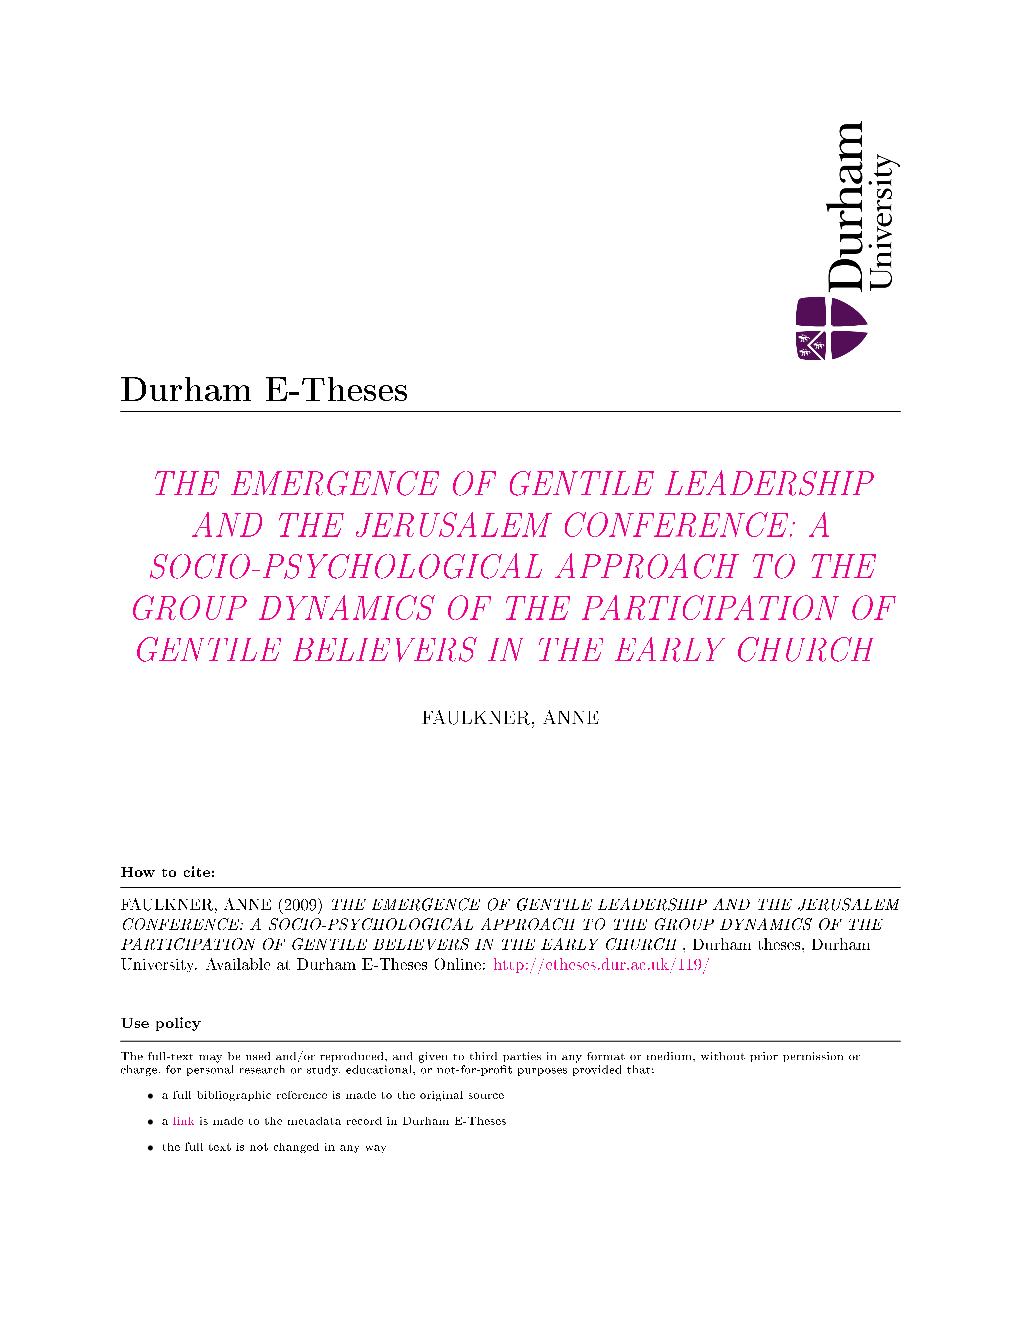 The Emergence of Gentile Leadership